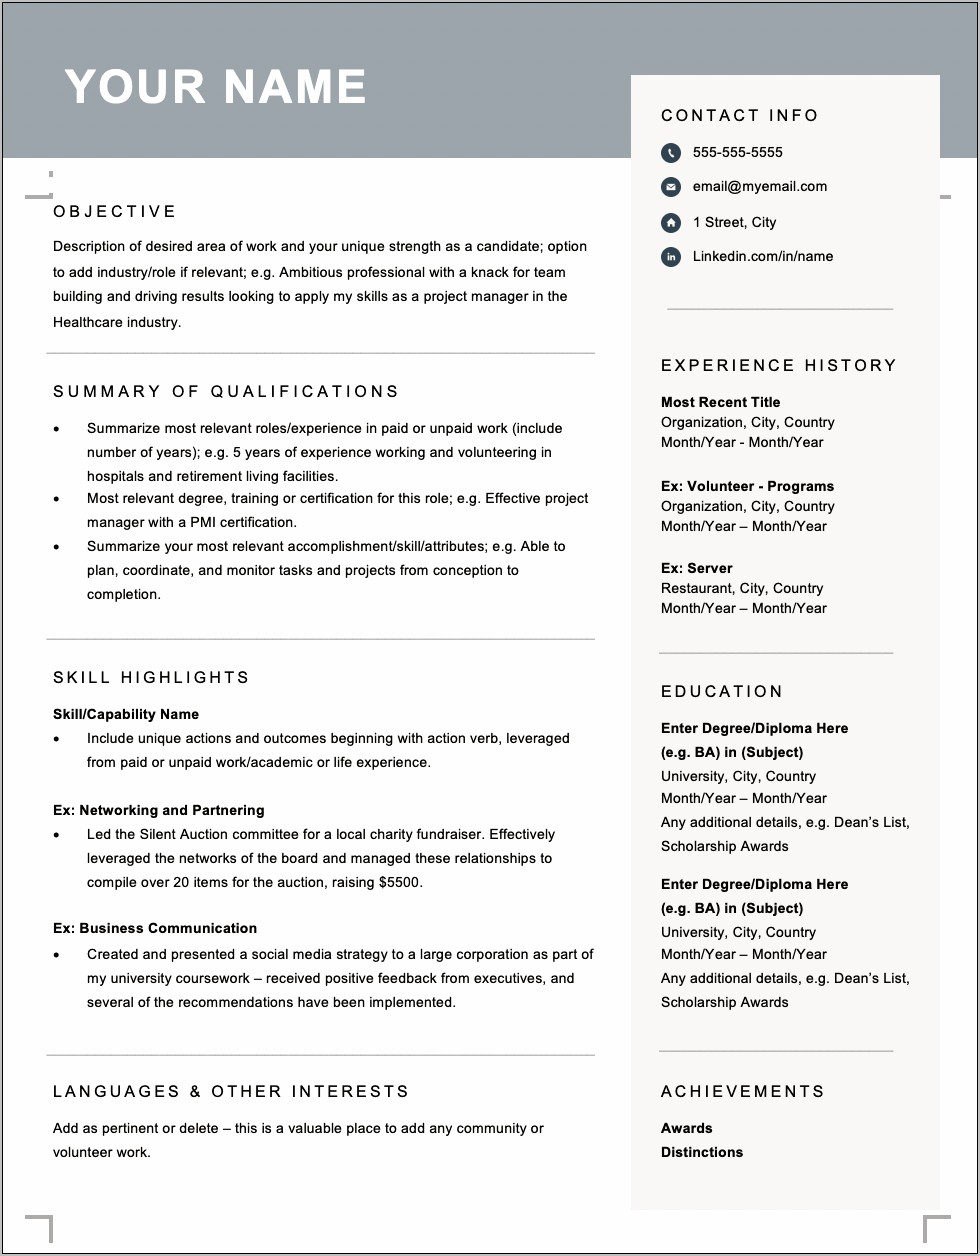 Standard Resume Format For Freshers Free Download Pdf